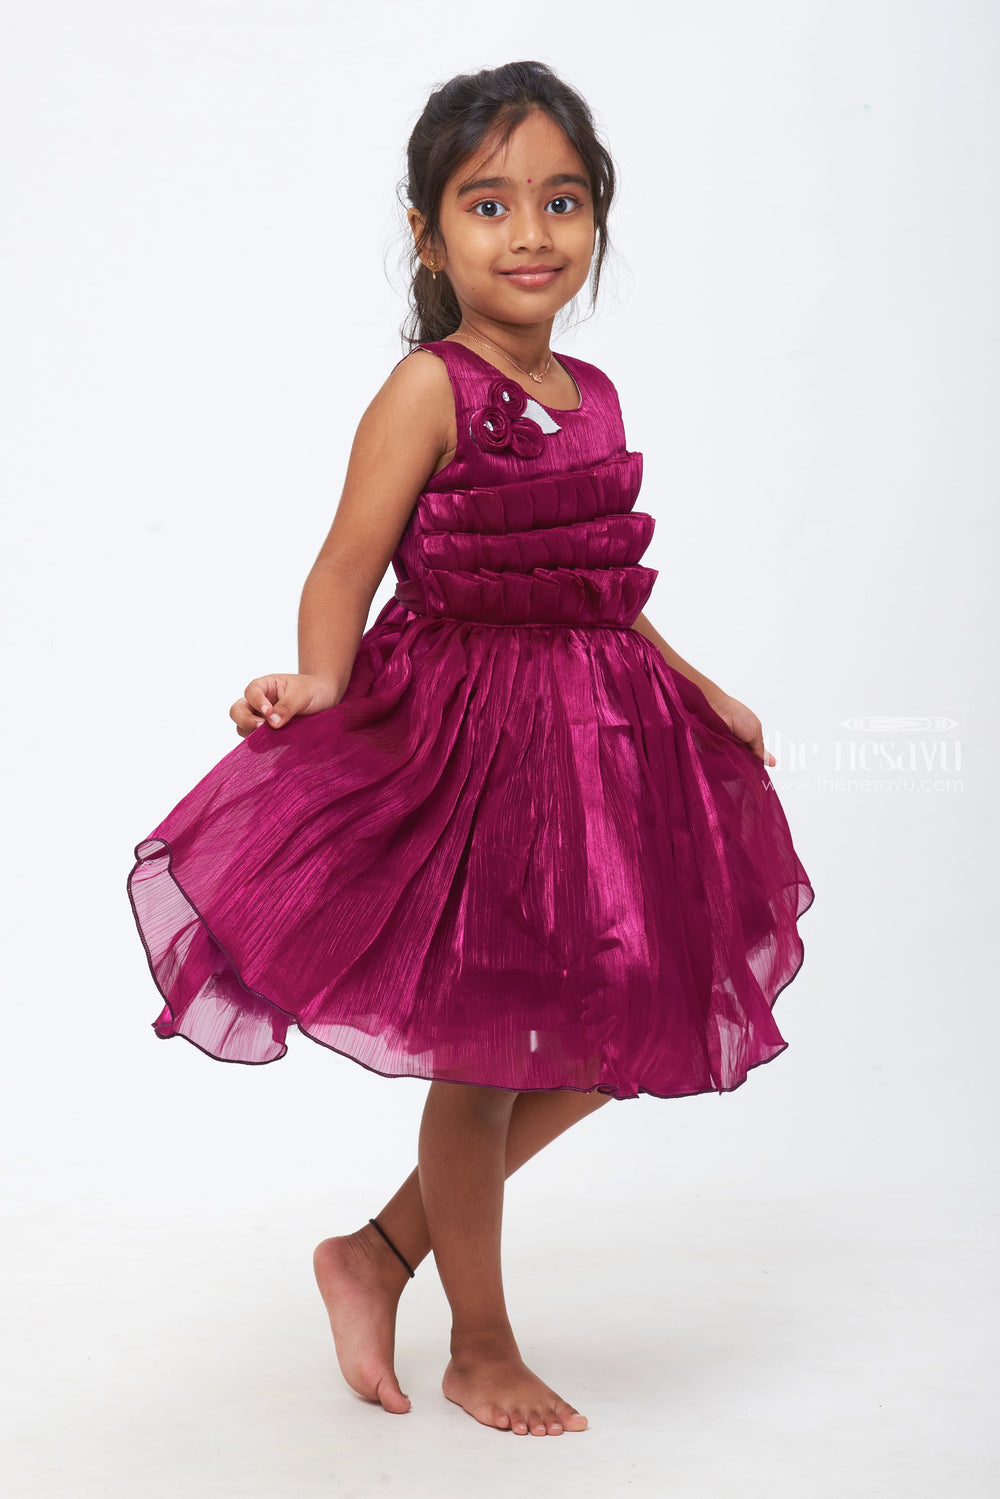 The Nesavu Girls Fancy Party Frock Royal Radiance: Girls Deep Purple Tulle Dress with Rosette Accents Nesavu From Playdates to Parties | Girls Chic Frocks Collection | The Nesavu